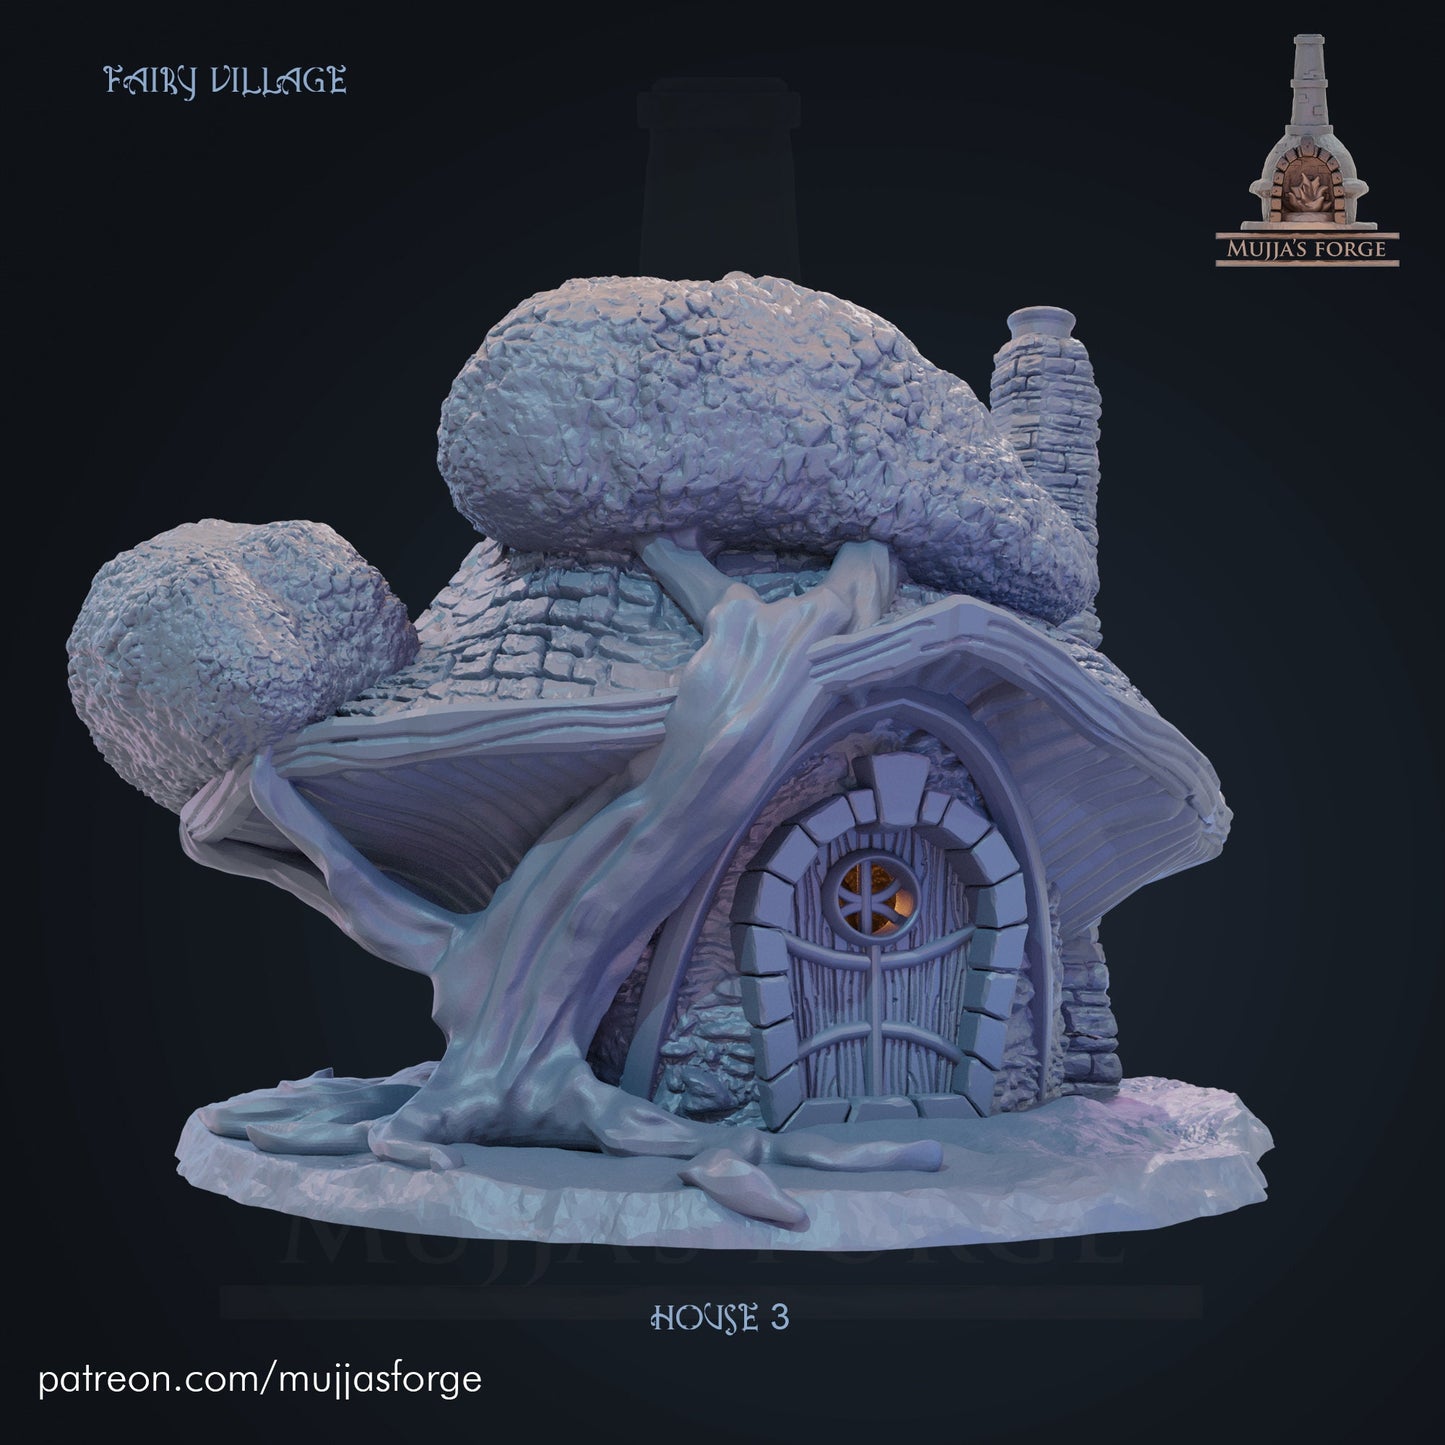 Fairy Village, House 1, Fairy House 1, 28mm Terrain, Fantasy Terrain, dungeons and Dragons, Fantasy, Gift, Tabletop, Terrain, Wargaming, RPG Terrain, Tabletop RPG, Wargaming, Wargame Terrain, Tabletop terrain, Tabletop. Odd, oddity, Gaming